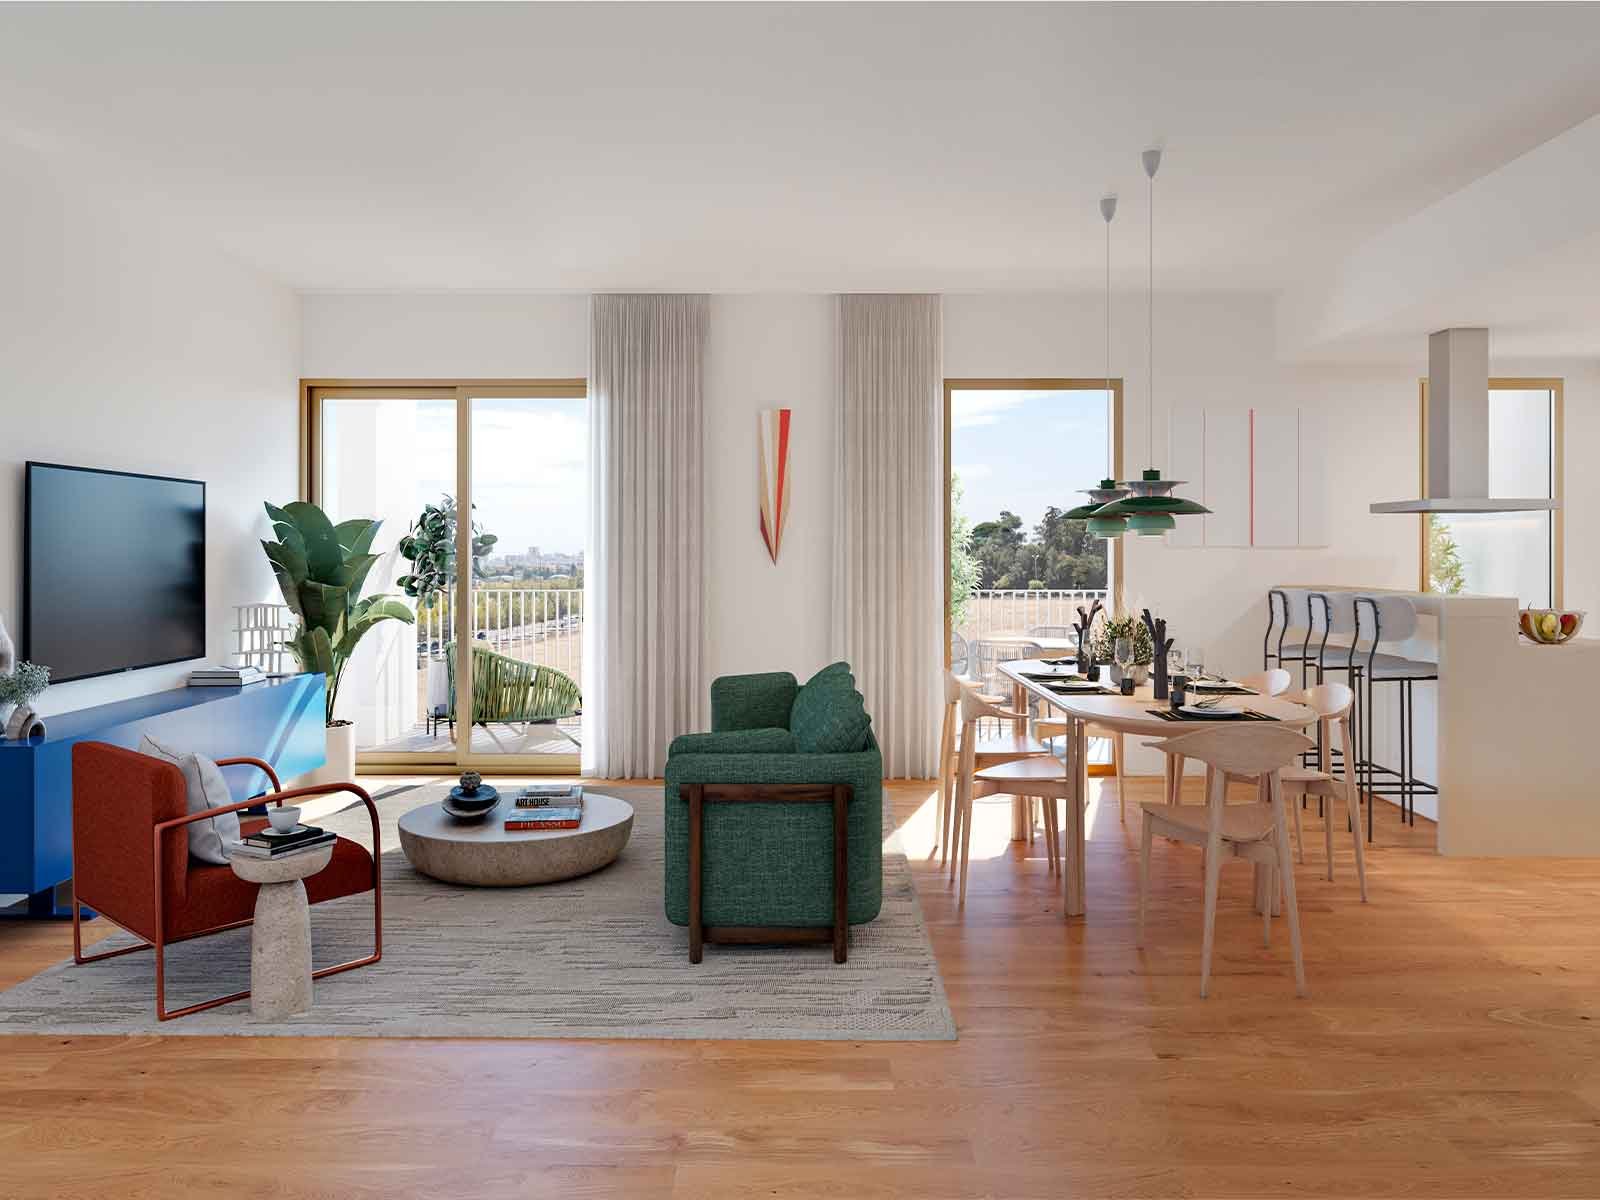 3 bedroom apartment with balcony and parking in new development, Lisbon 3695912726